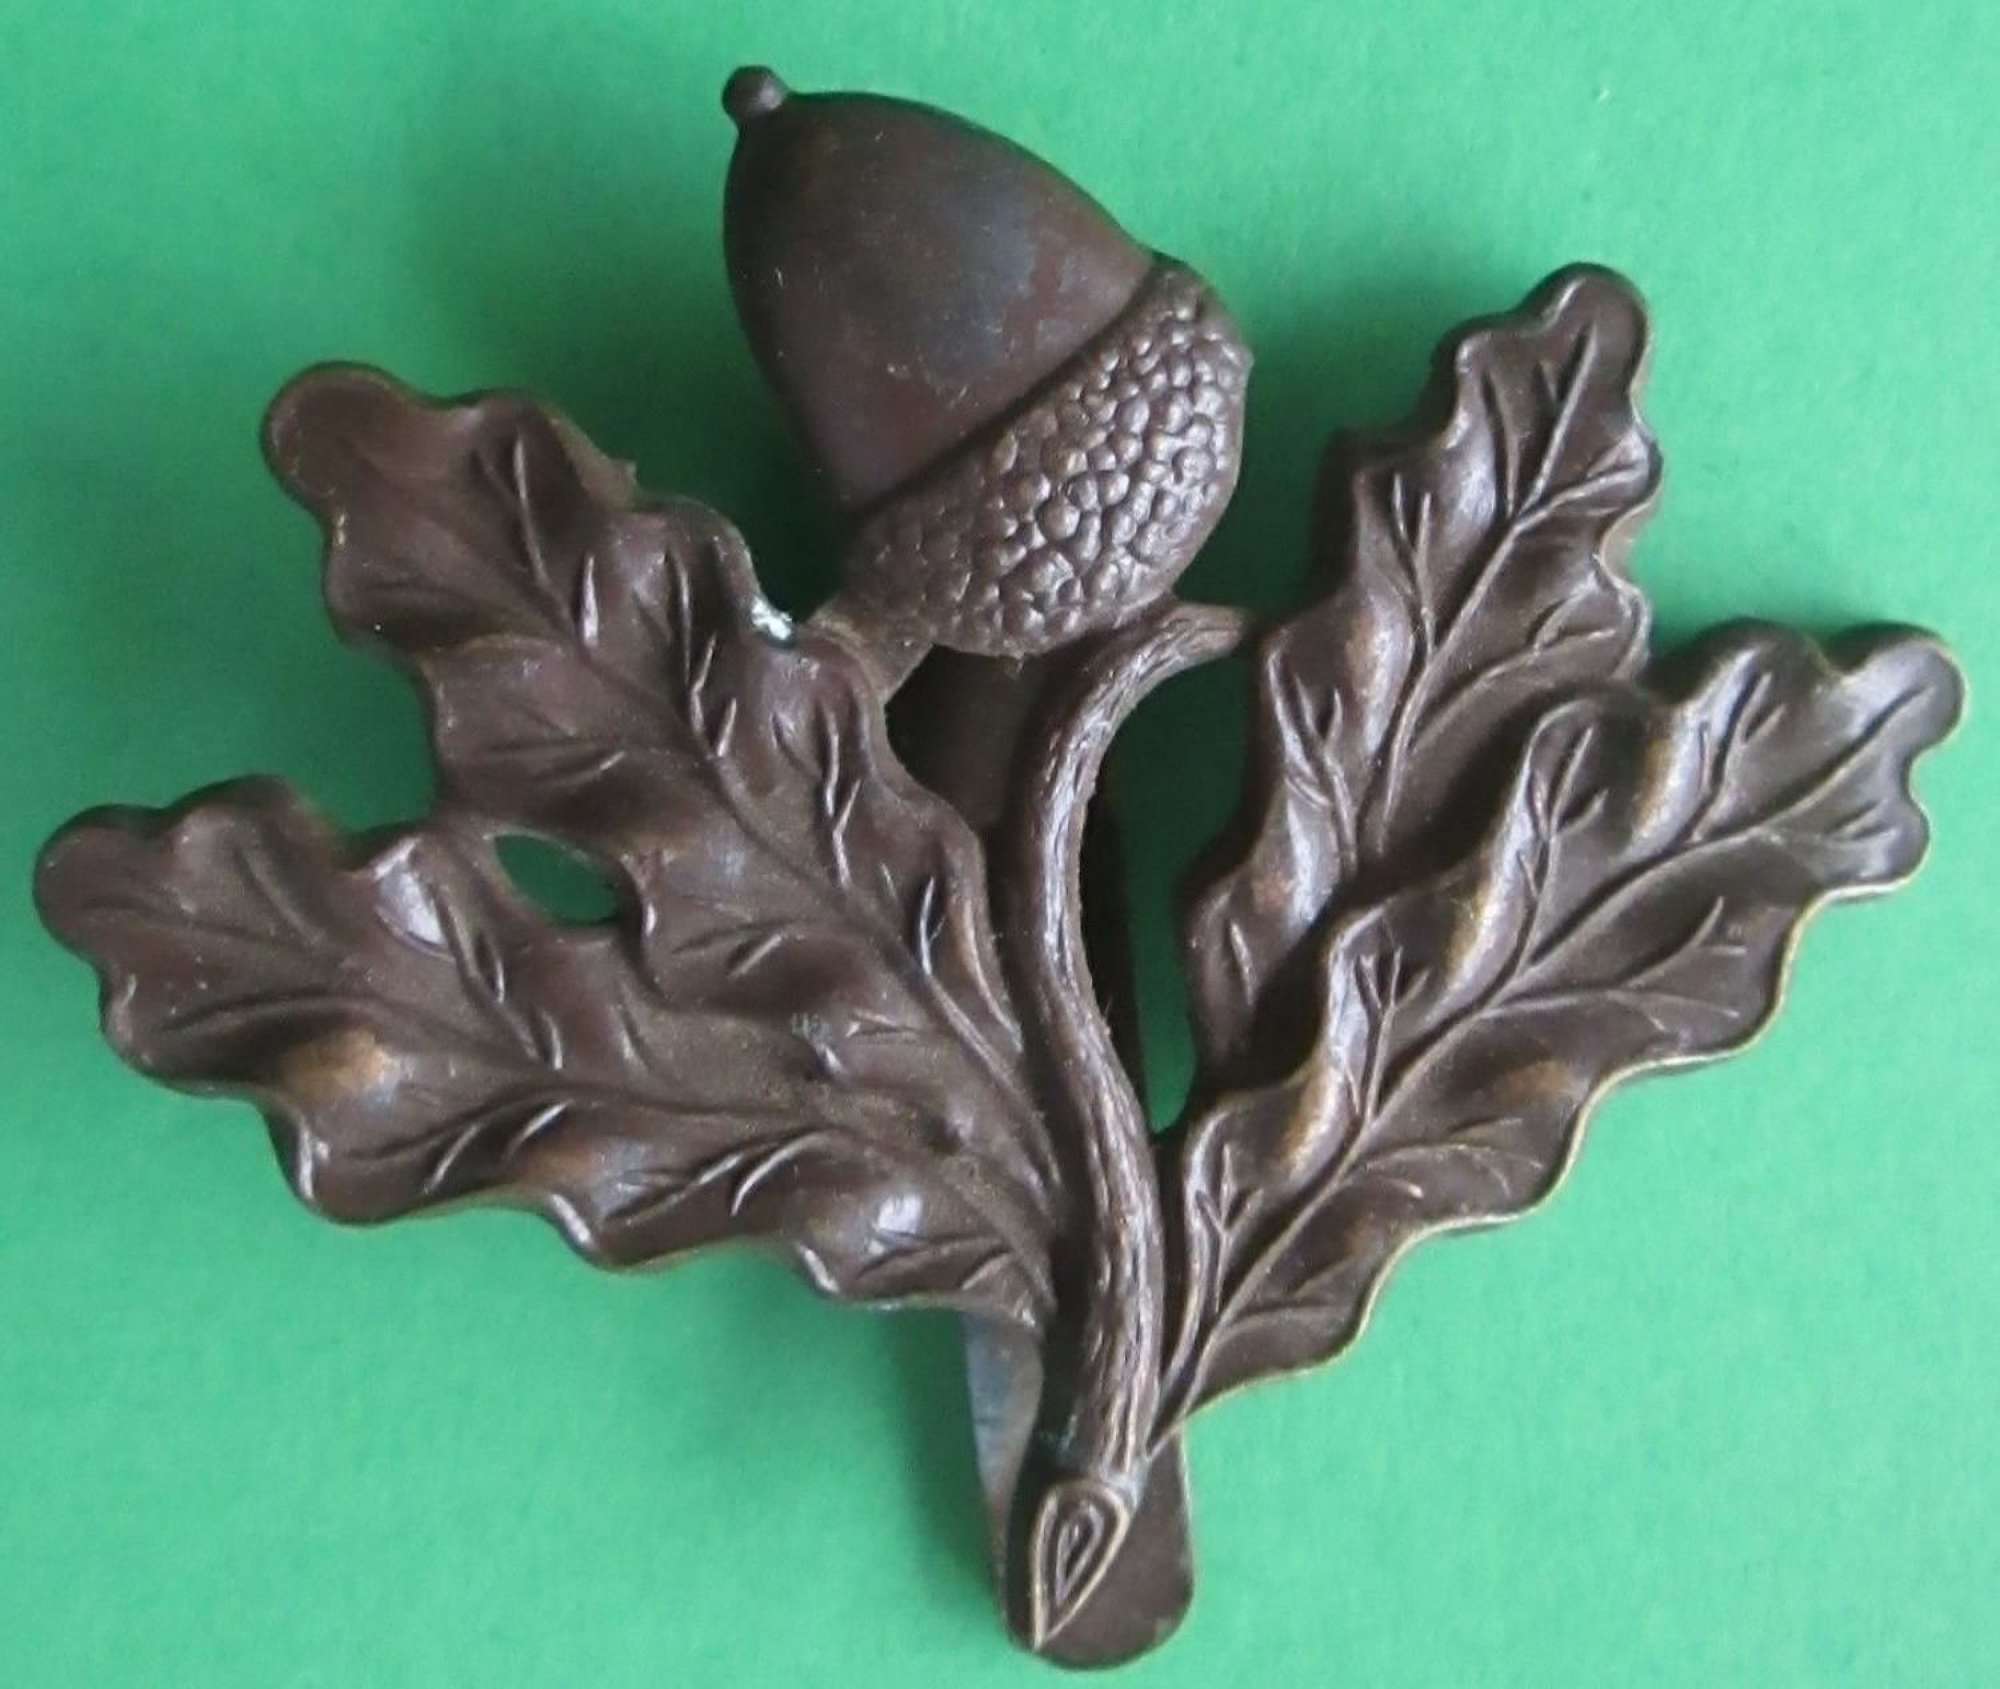 A SOUTH NOTTINGHAM HUSSARS BRONZED OTHER RANKS CAP BADGE